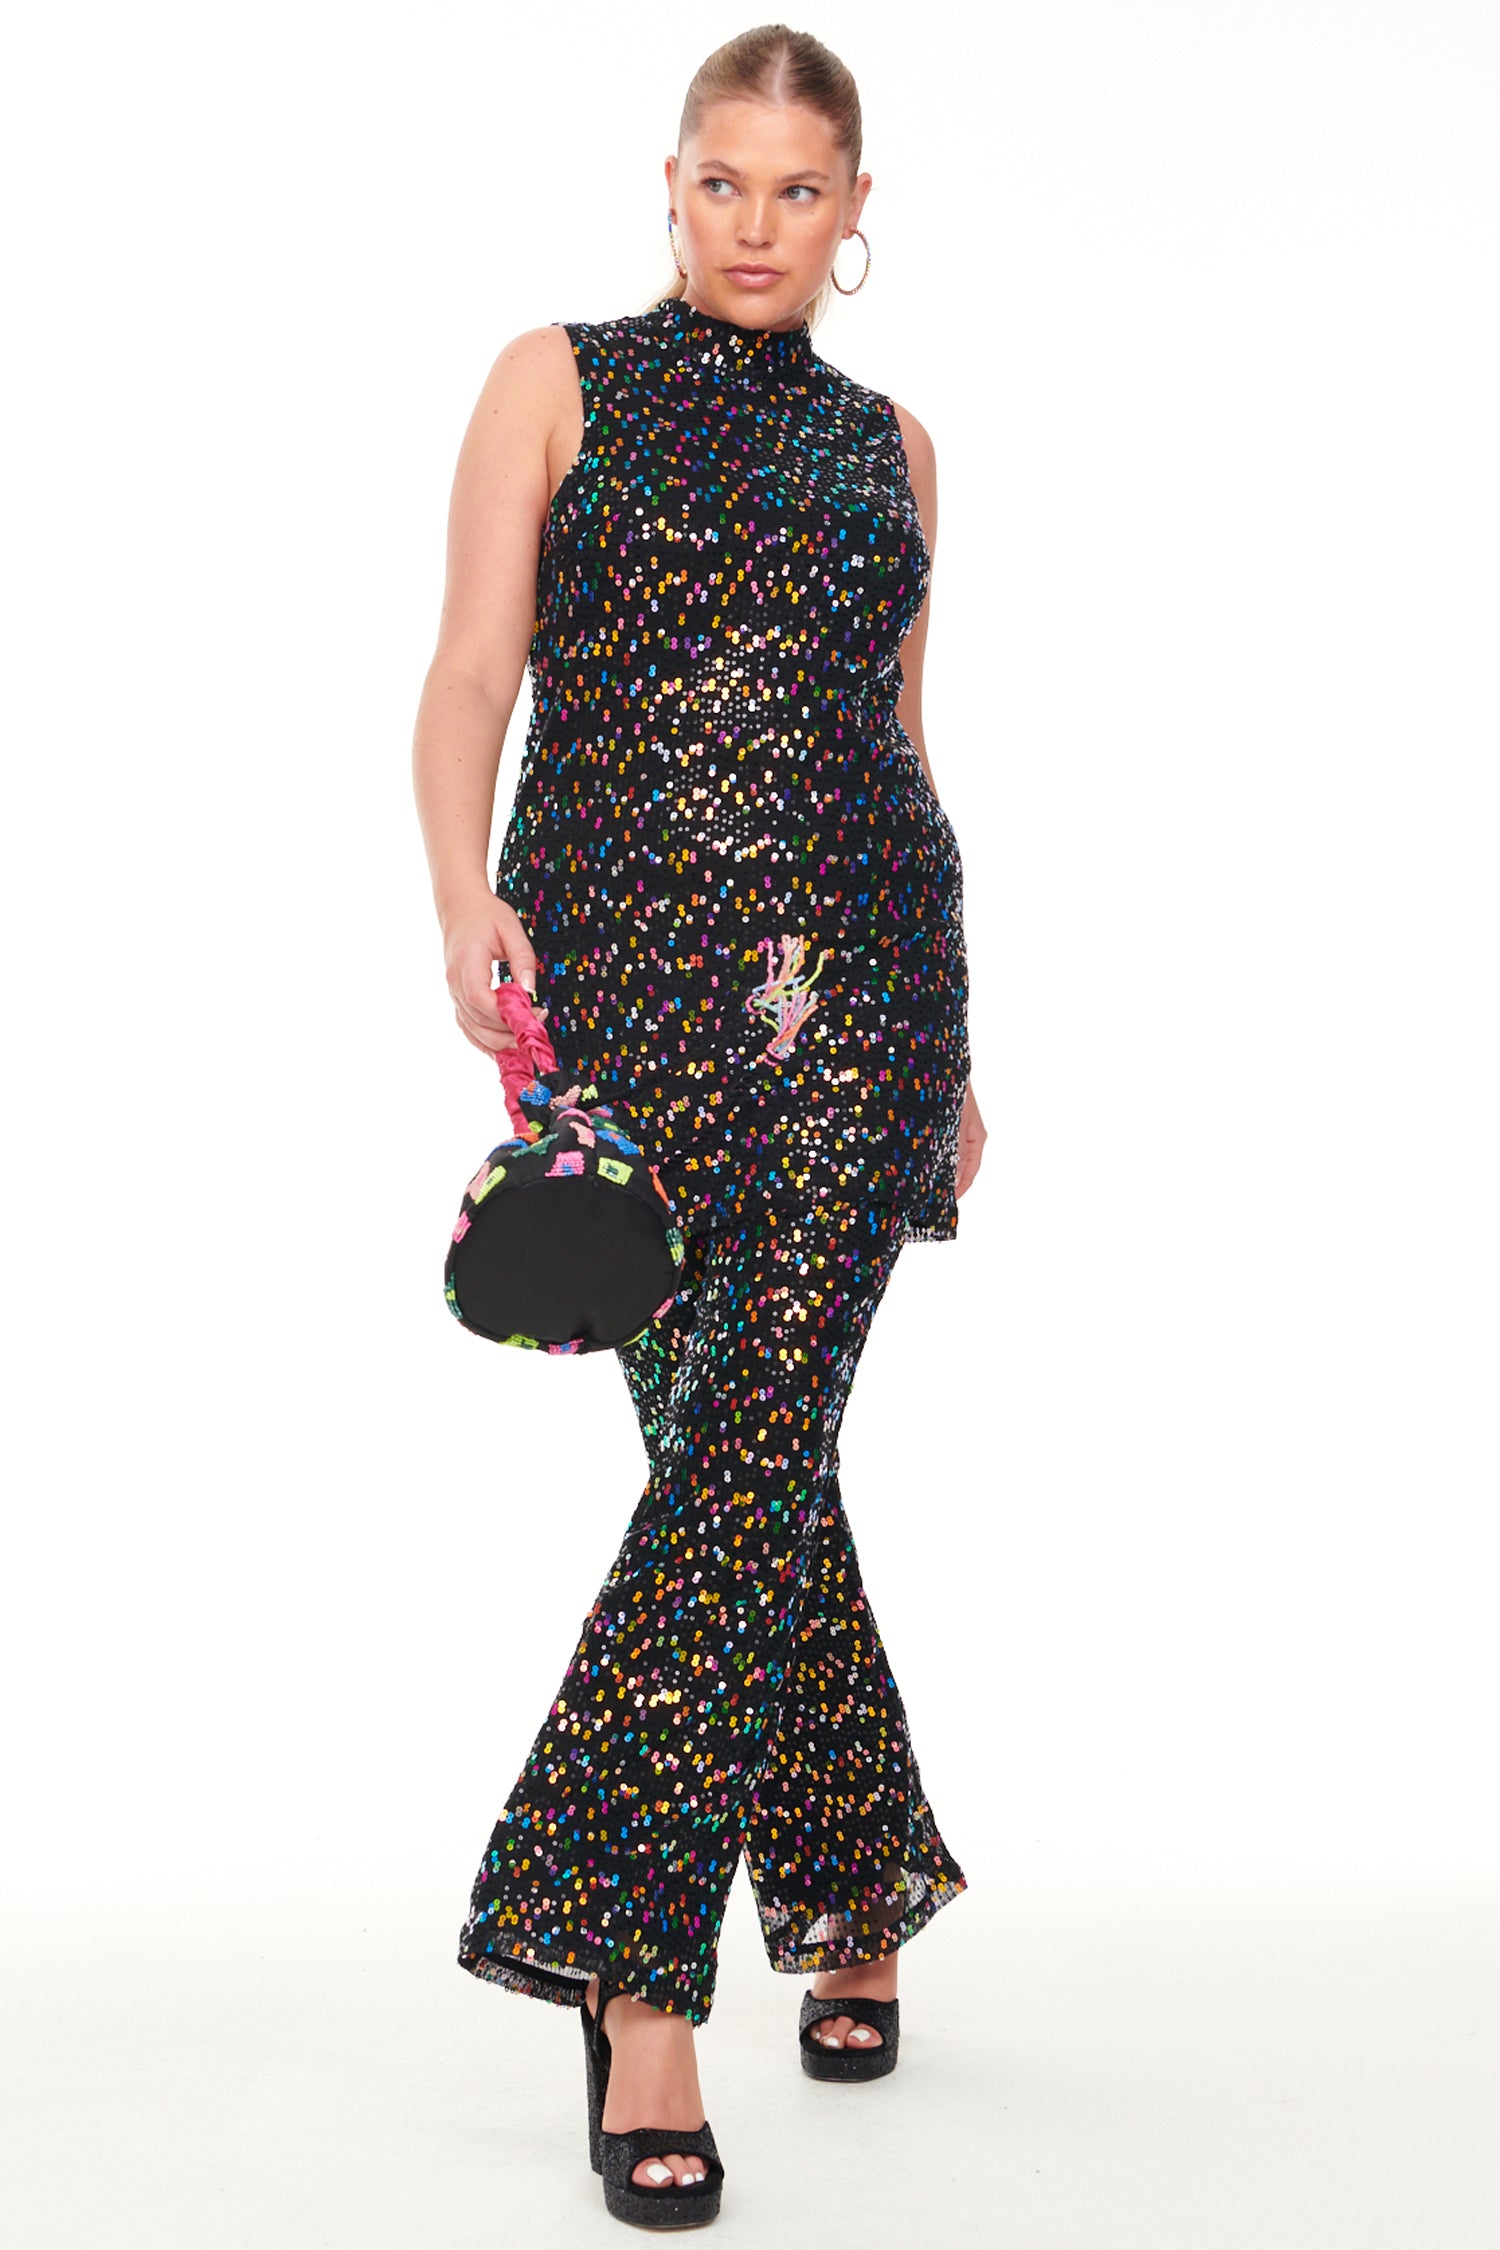 Model wearing Sequin Emily Dress standing facing the camera